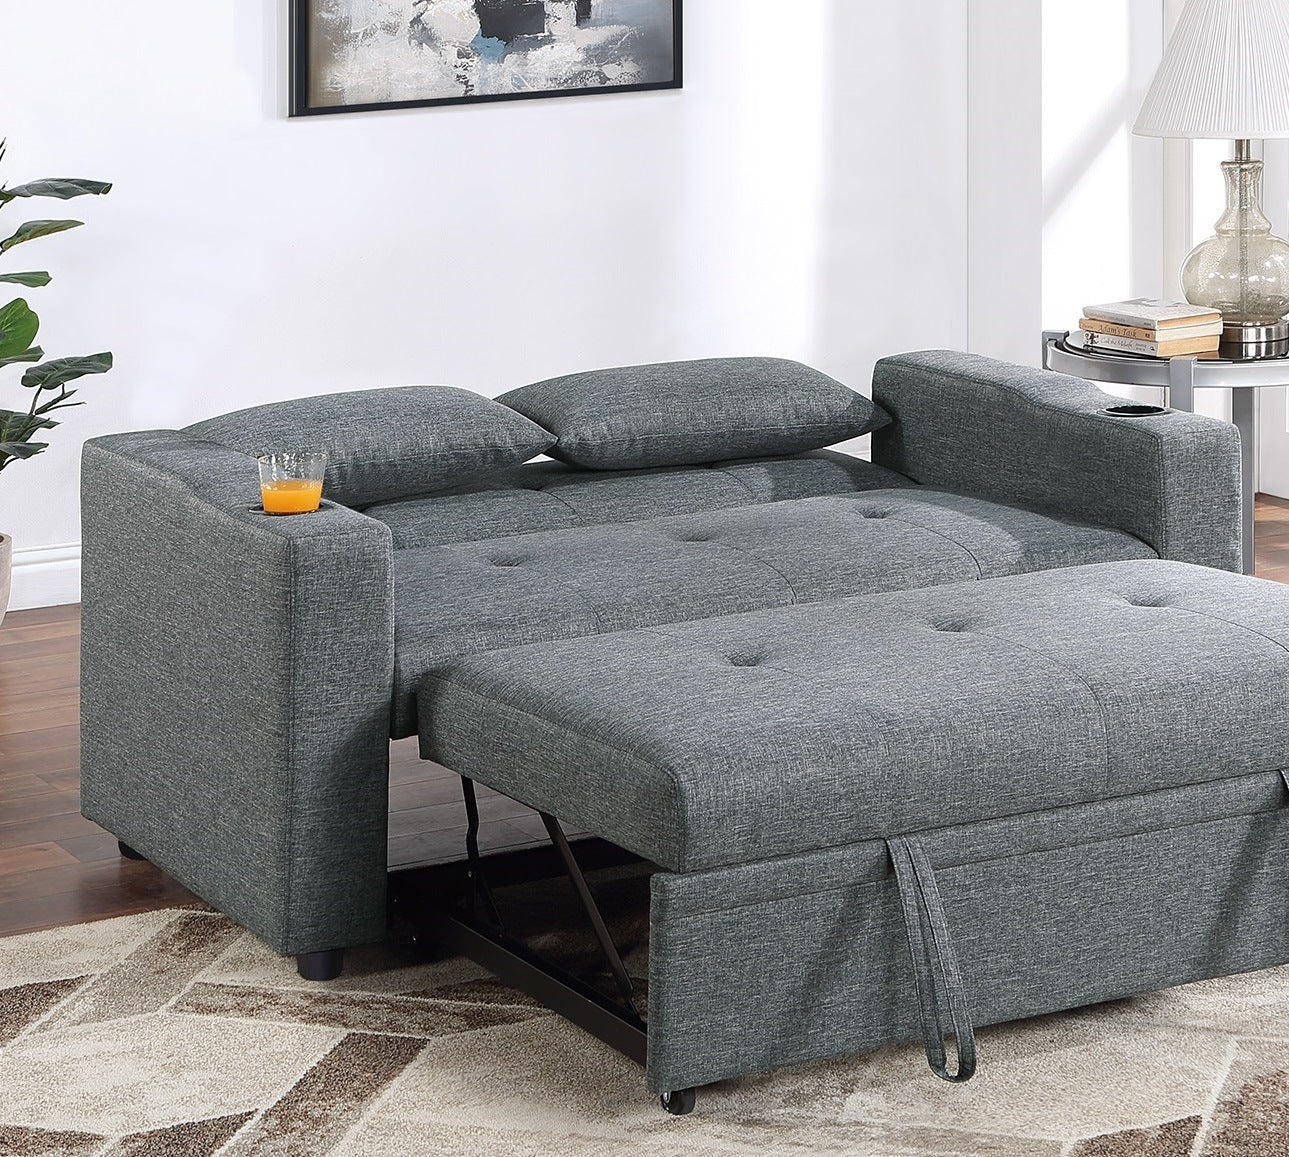 Contemporary Black Gray Sleeper Sofa Pillows Plush Tufted Seat 1pc Convertible Sofa w Cup Holder Polyfiber Couch